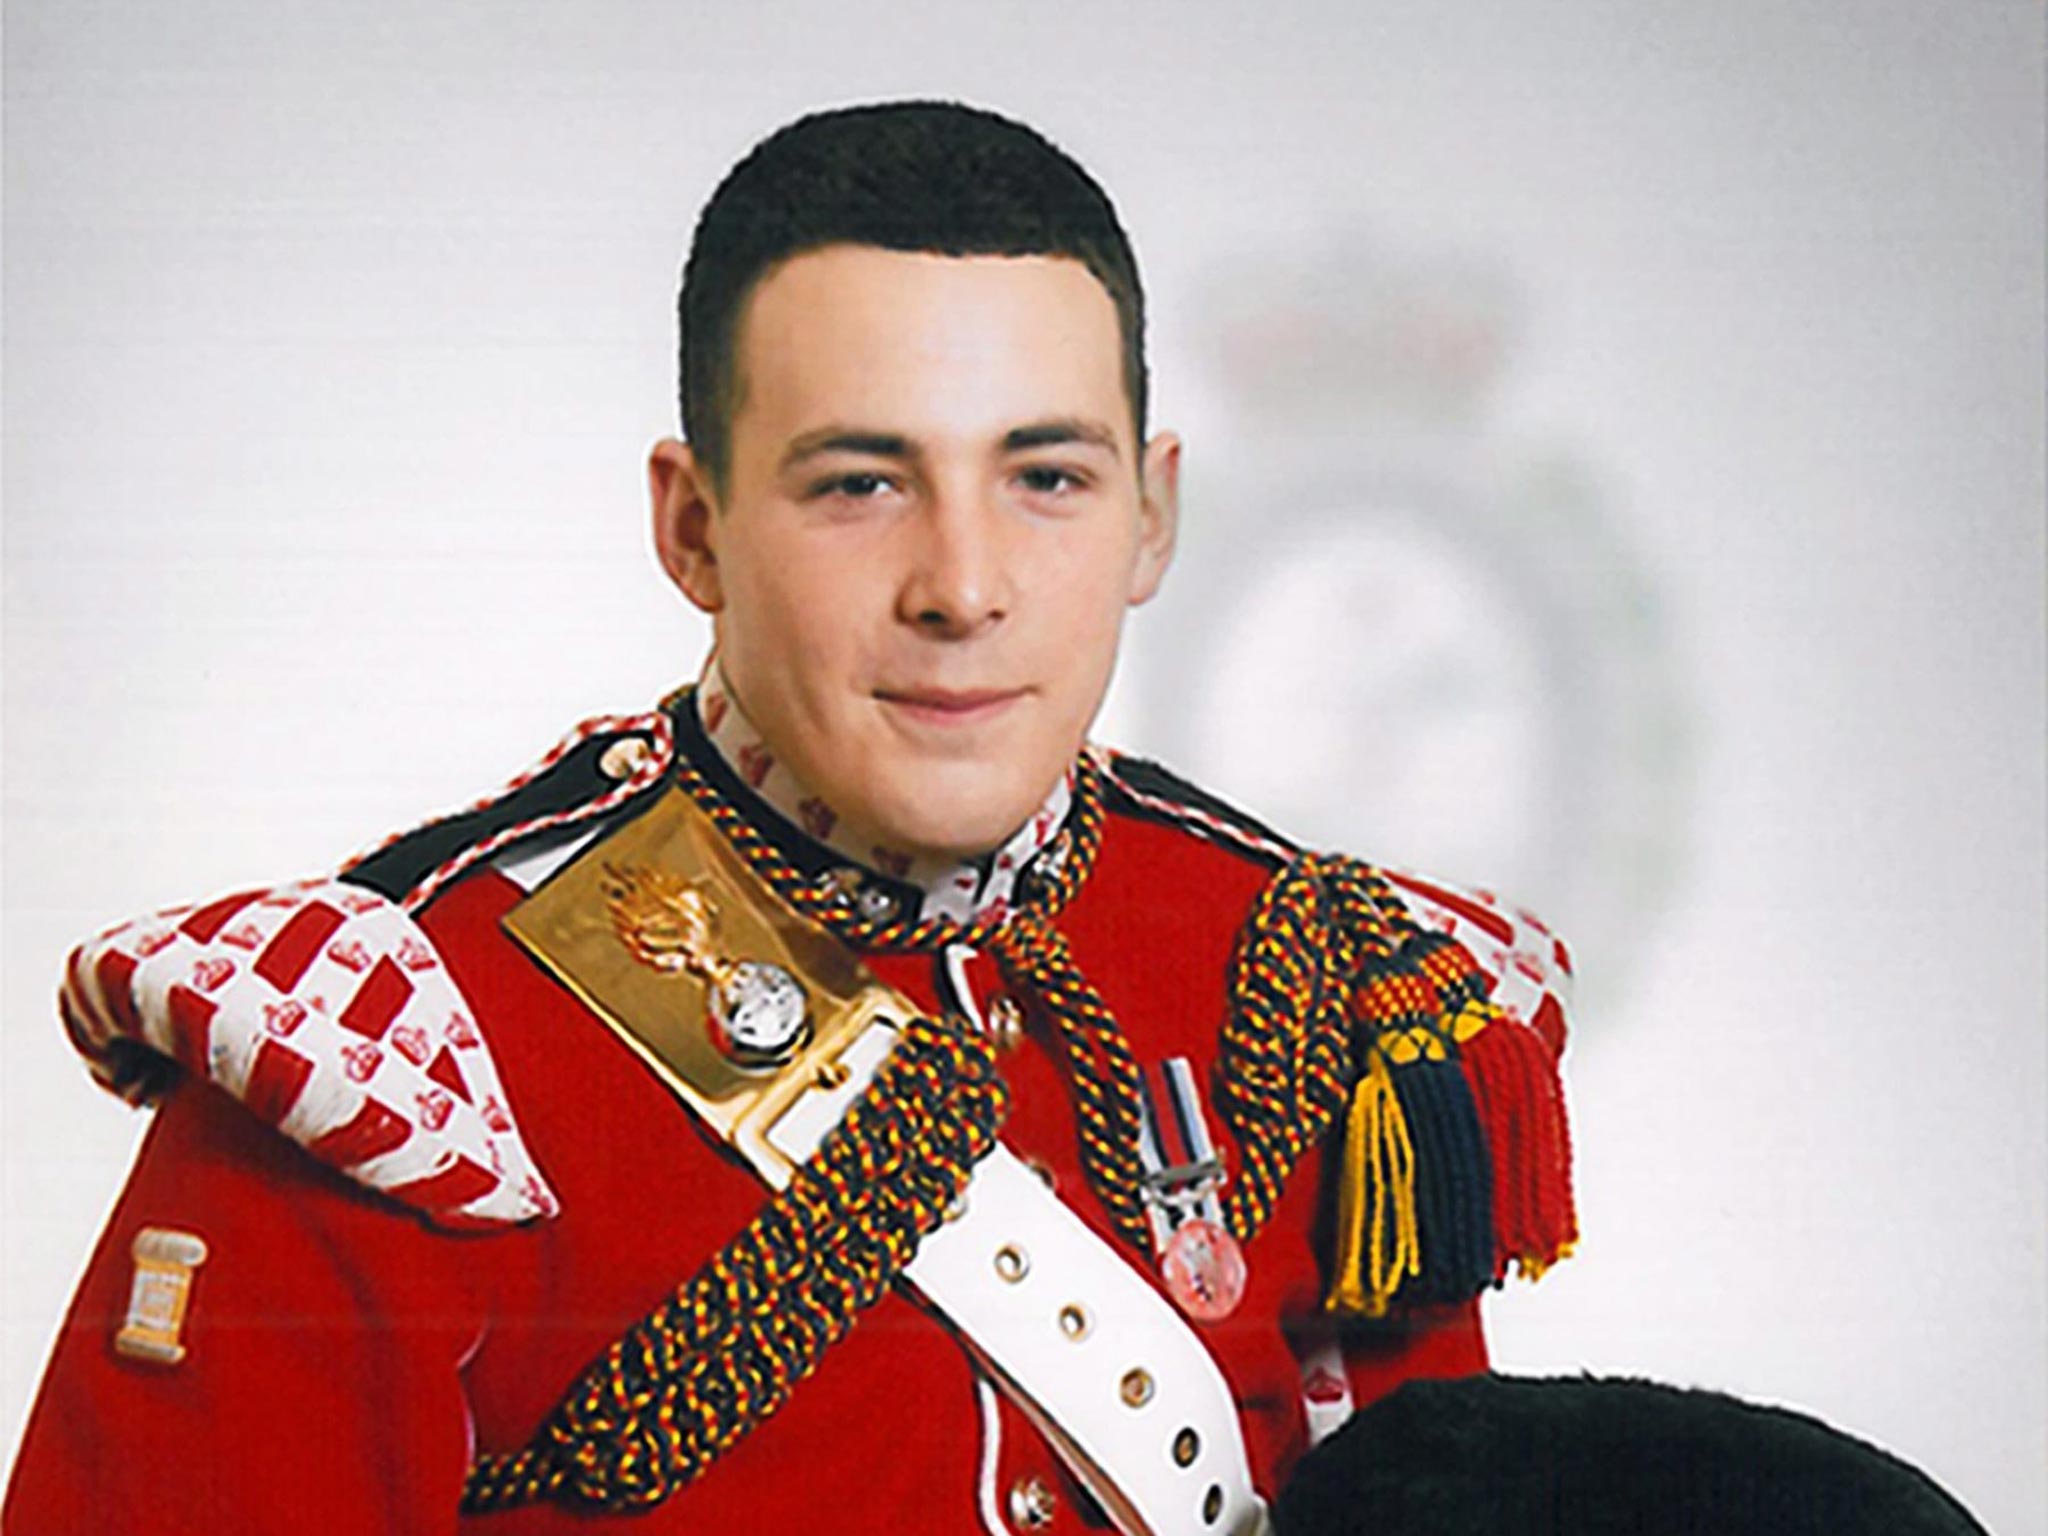 The judge said the family of Fusilier Lee Rigby had shown ‘great dignity’ during the trial